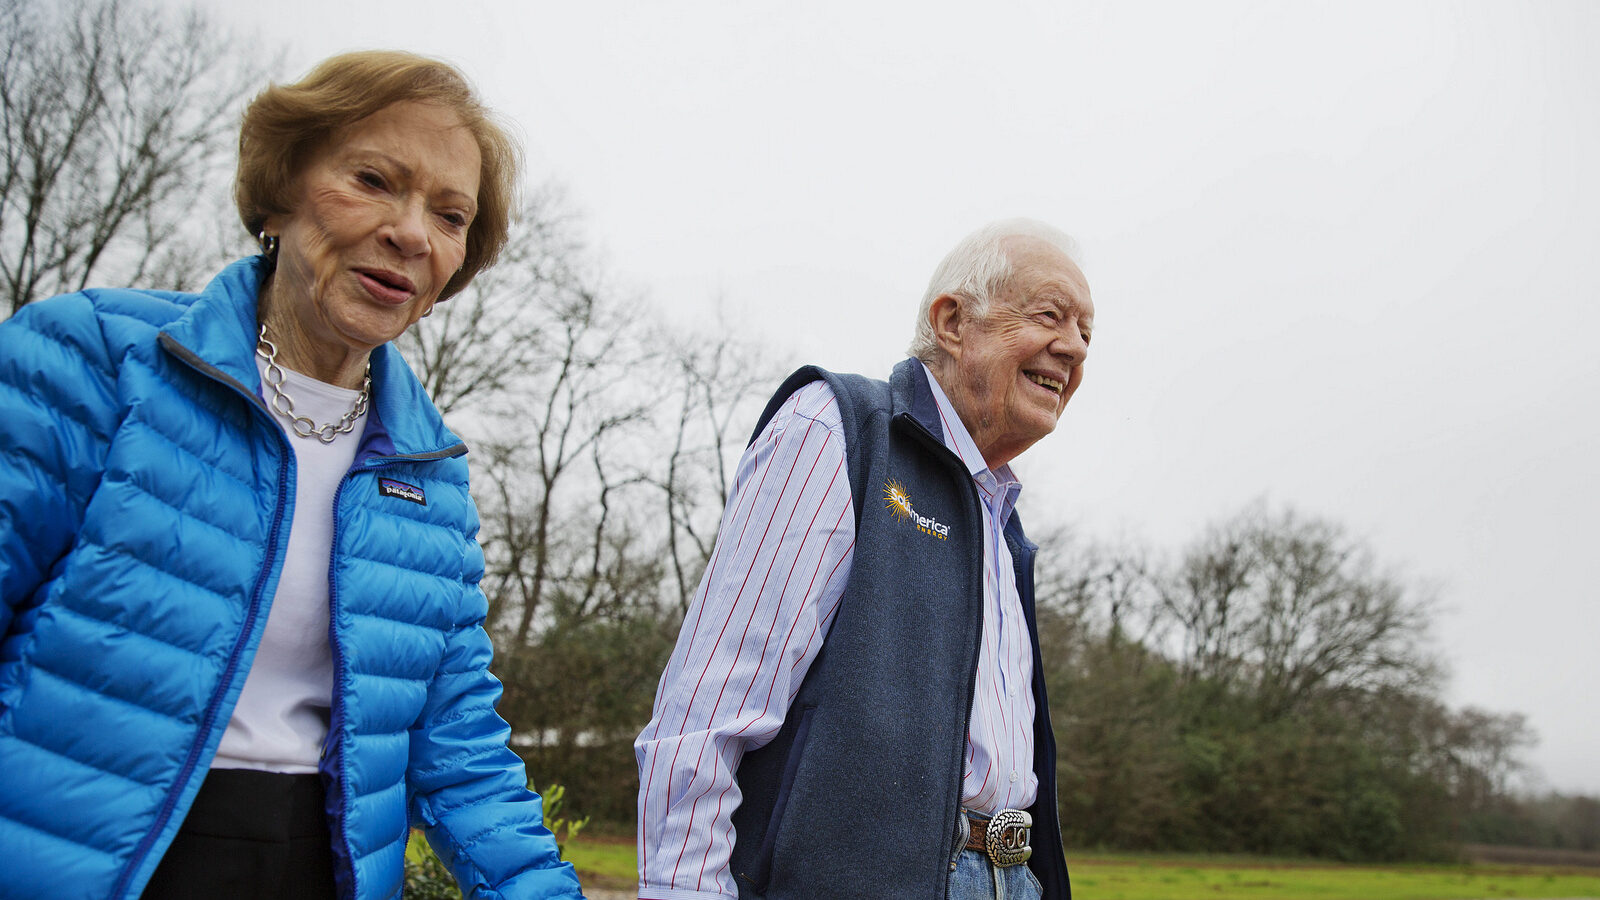 Former President Jimmy Carter, right, and his wife Rosalynn arrive for a ribbon cutting ceremony for a solar panel project on farmland he owns in their hometown of Plains, Ga., Wednesday, Feb. 8, 2017.(AP/David Goldman)